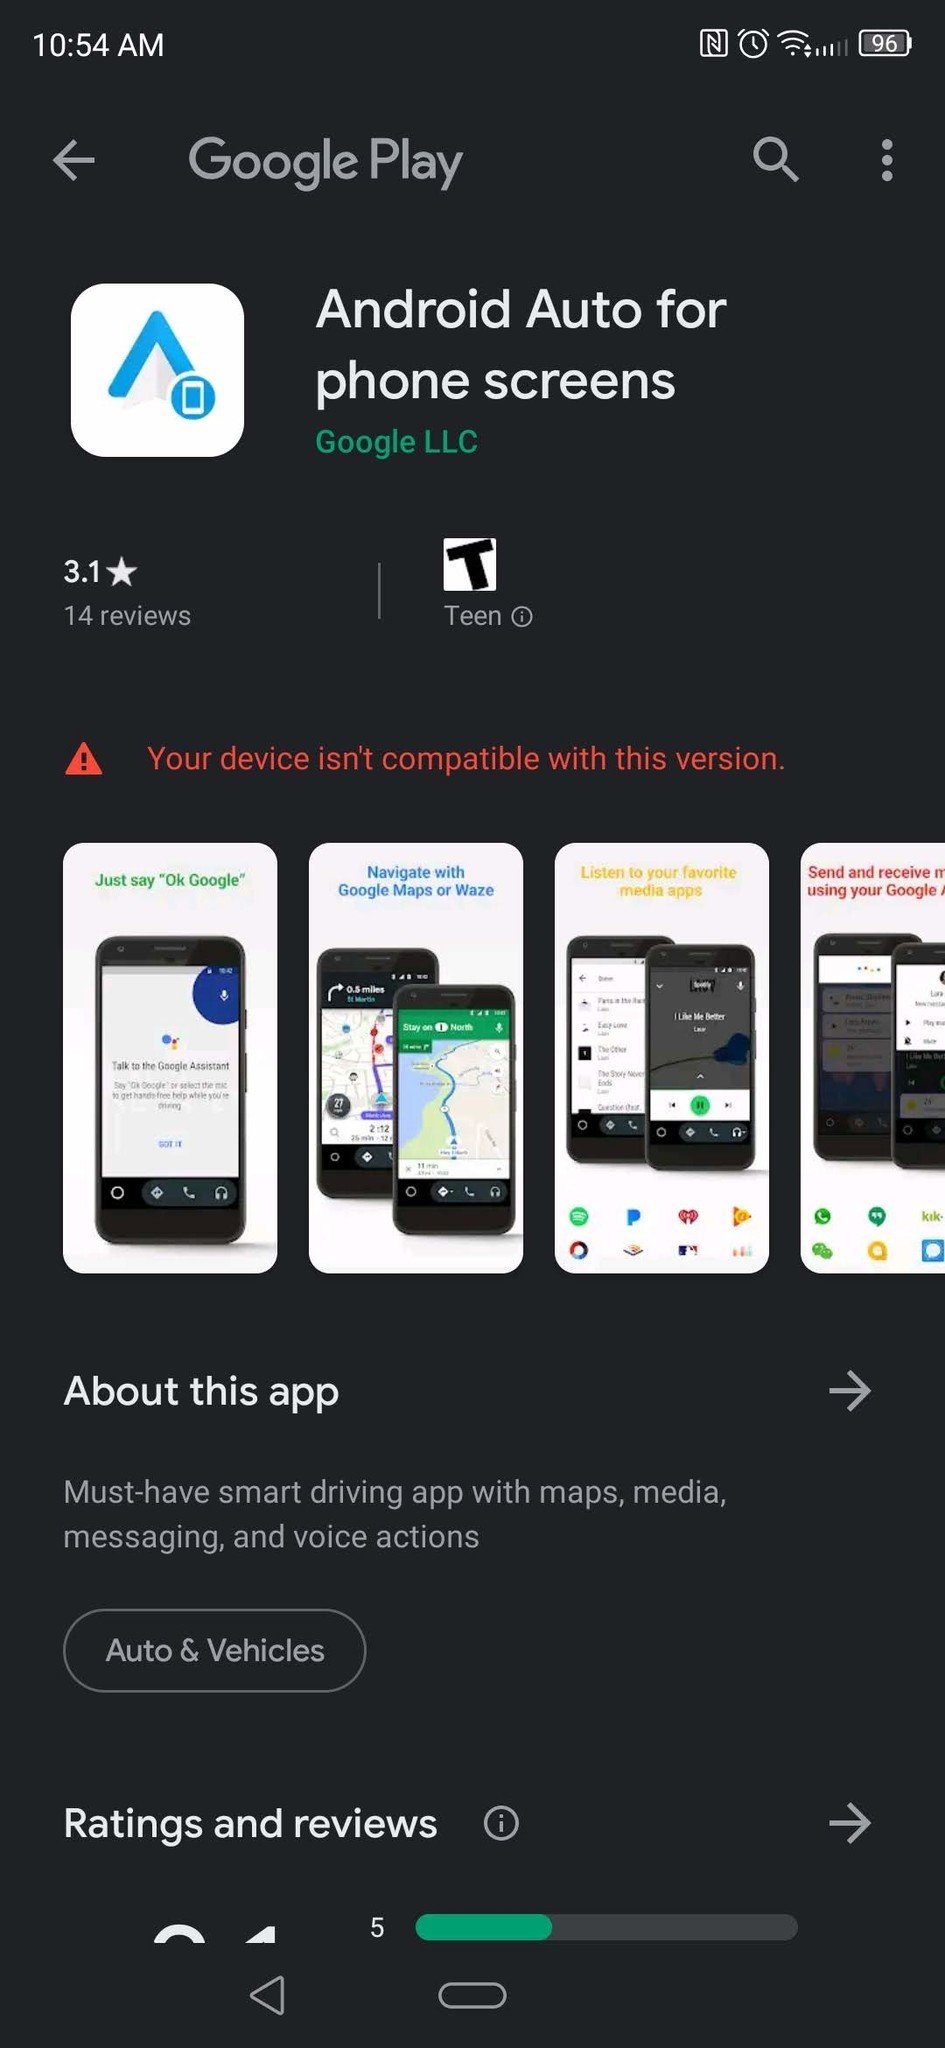 Android Auto for phone screens app